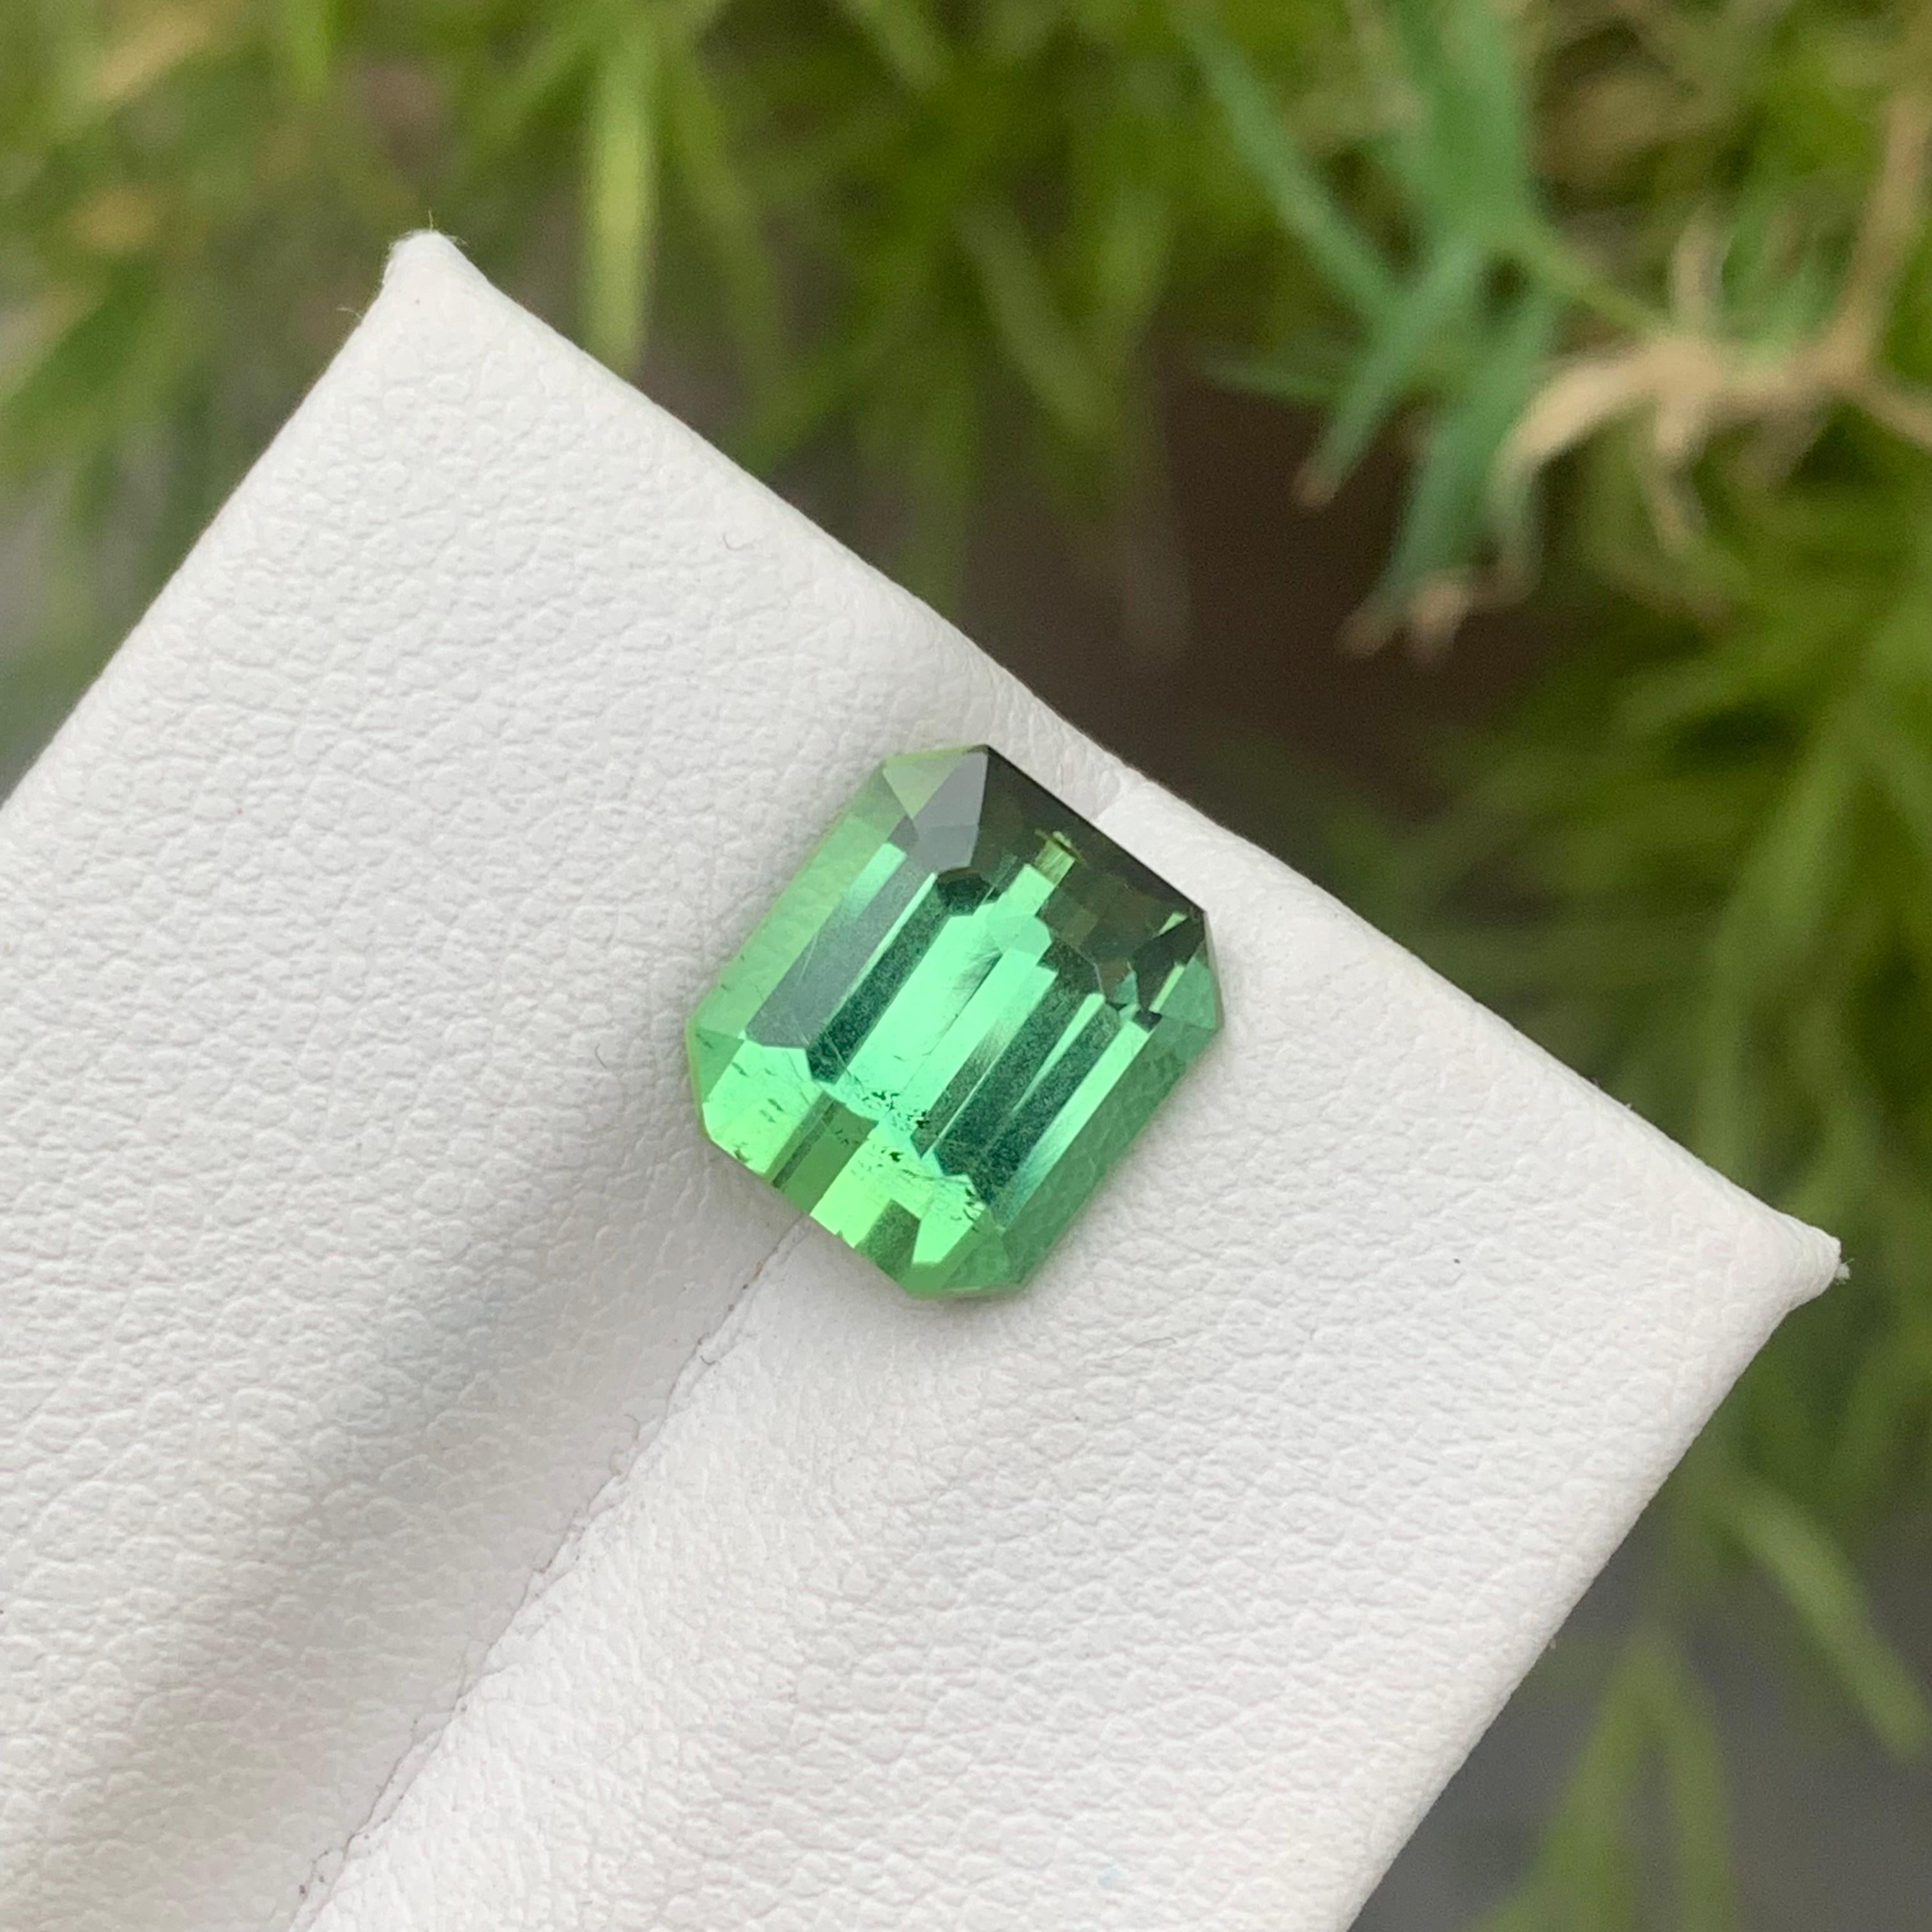 Gemstone Type : Tourmaline
Weight : 3.65 Carats
Dimensions : 9.3x8.3x5.8 Mm
Origin : Kunar Afghanistan
Clarity : Eye Clean
Shape: Emerald
Color: Mint Green
Certificate: On Demand
Basically, mint tourmalines are tourmalines with pastel hues of light